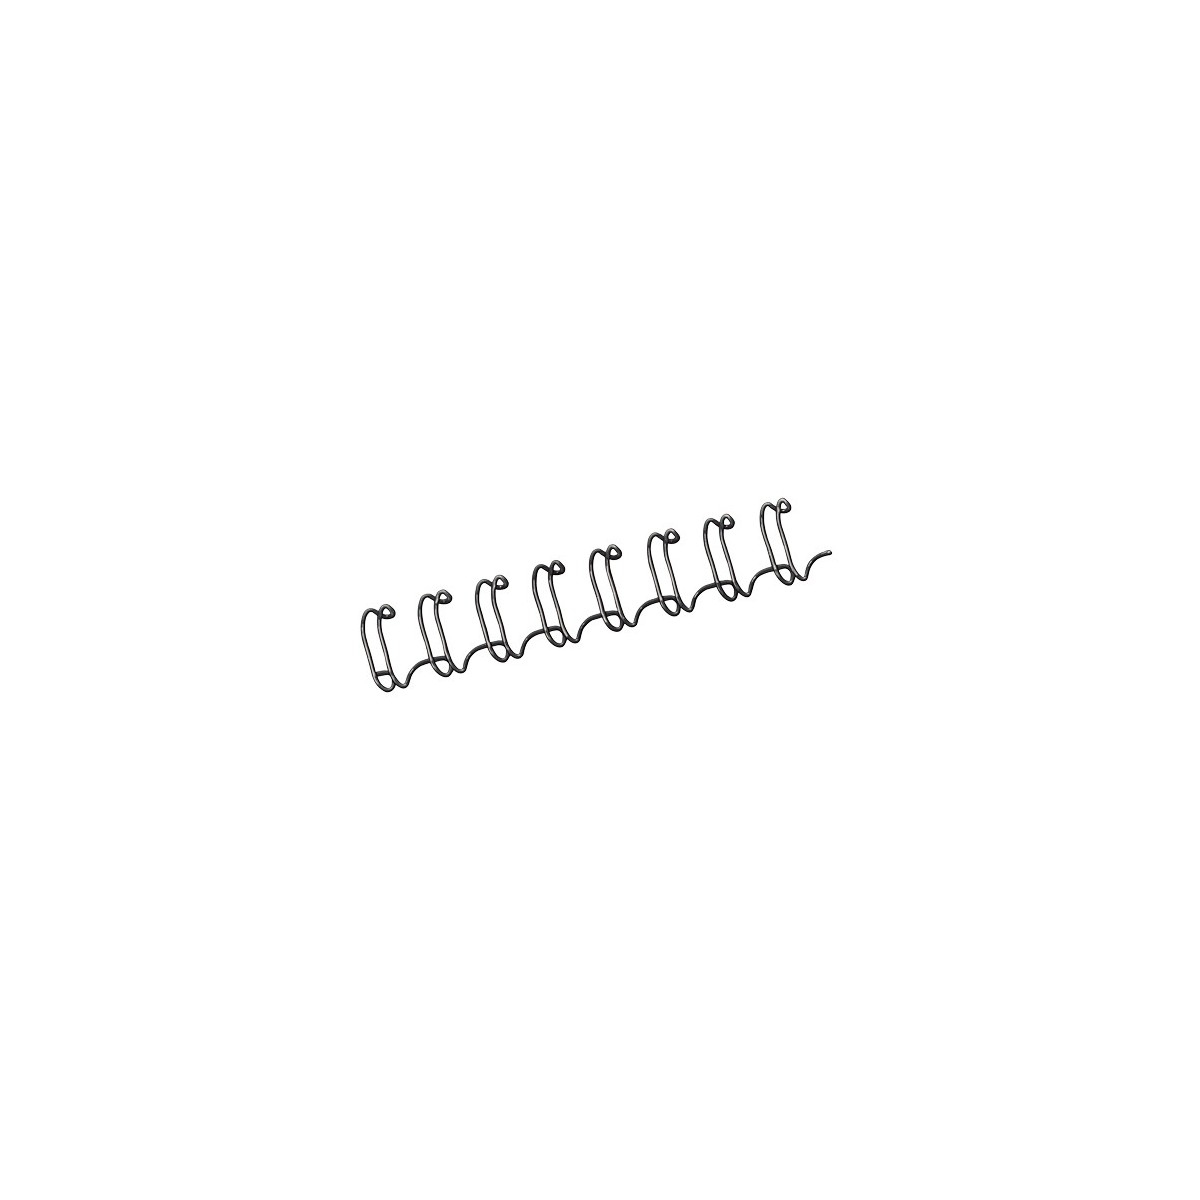 PACK 100 WIRES 12 MM NEGRO FELLOWES 53273